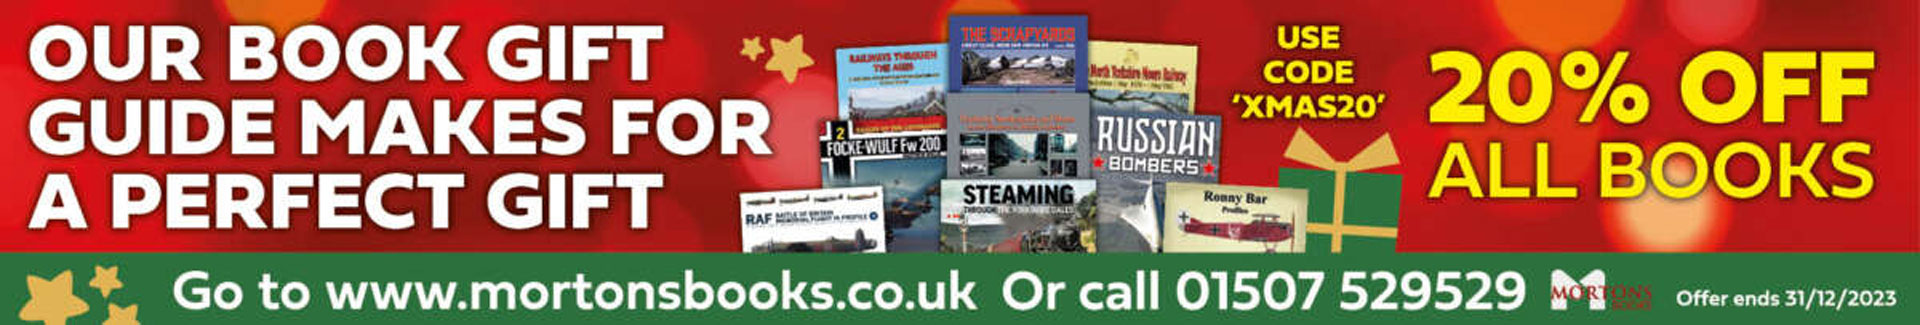 Mortons Books Christmas Offer - Save 20% on books with XMAS20 voucher code